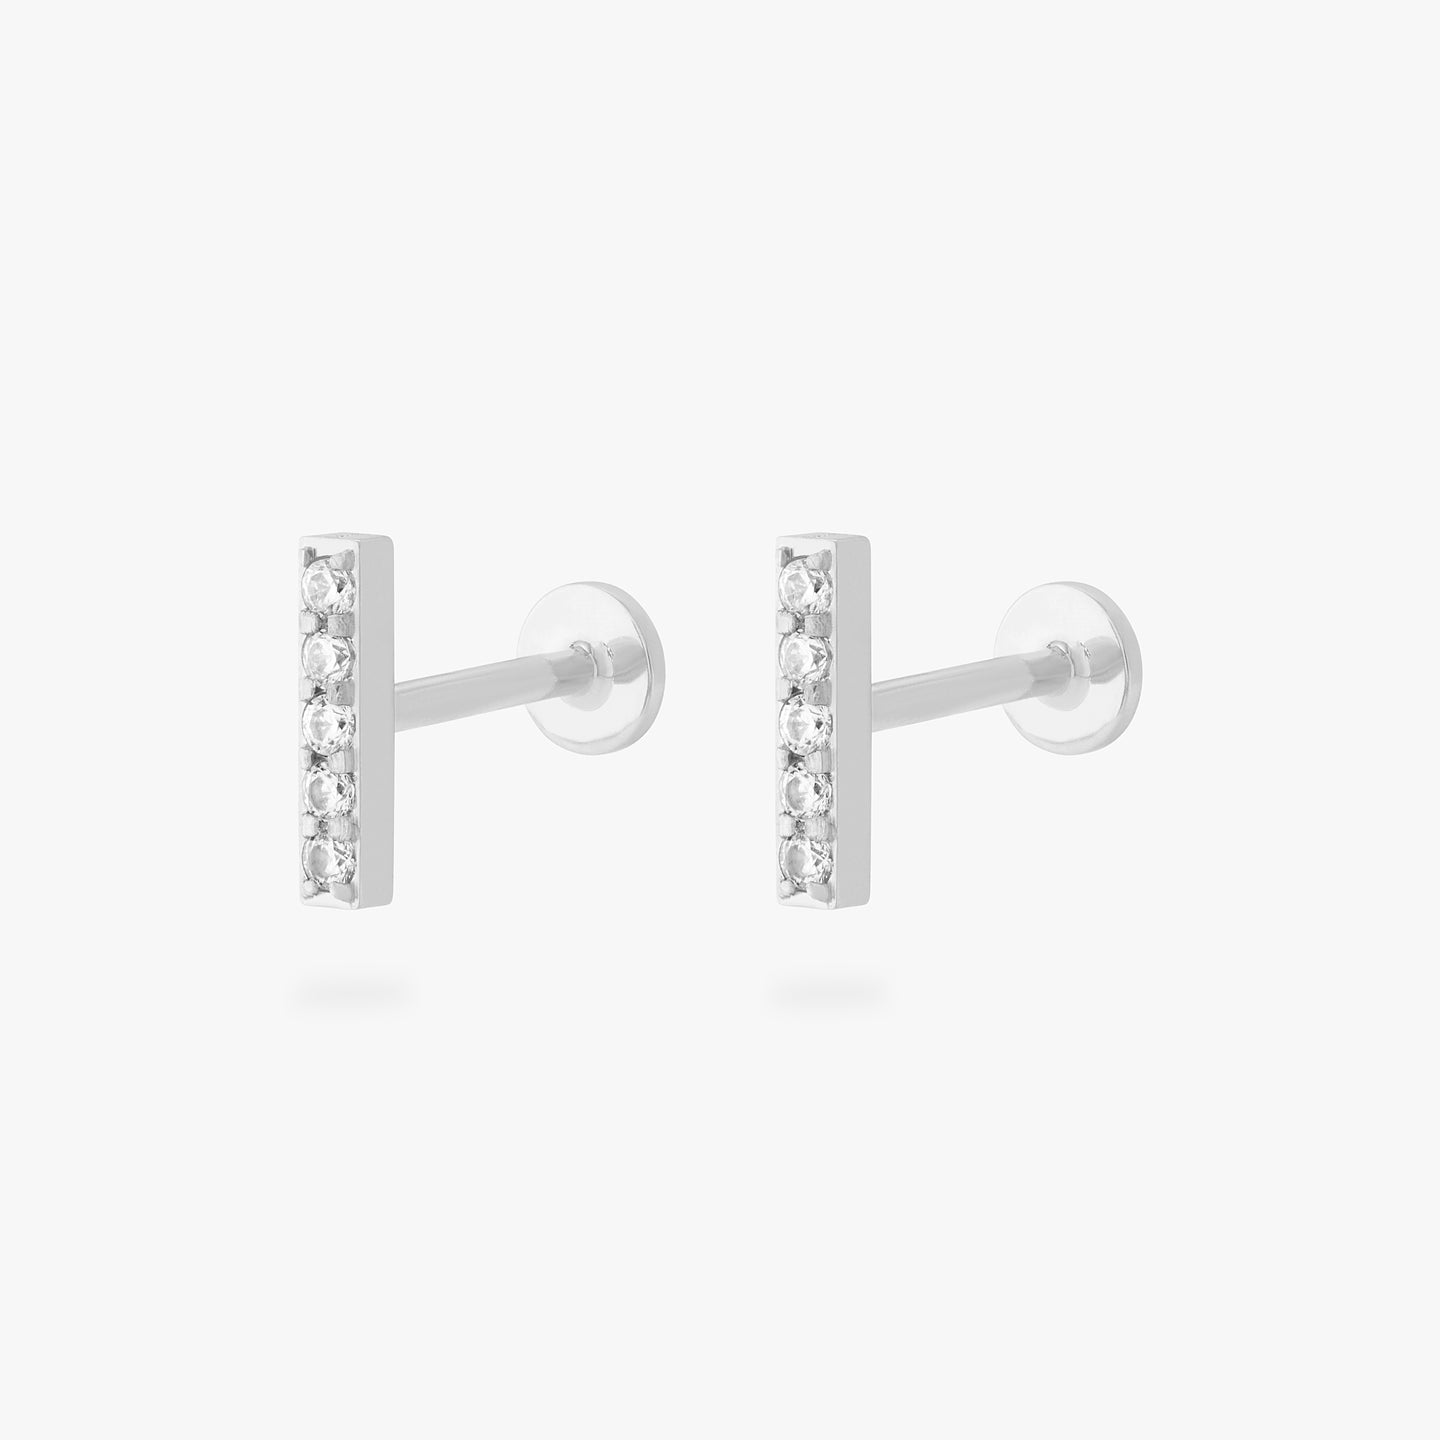 This is an image of a pair of silver/clear bars that have 5 mini CZs in a line formation with silver labrets with circle discs and the 